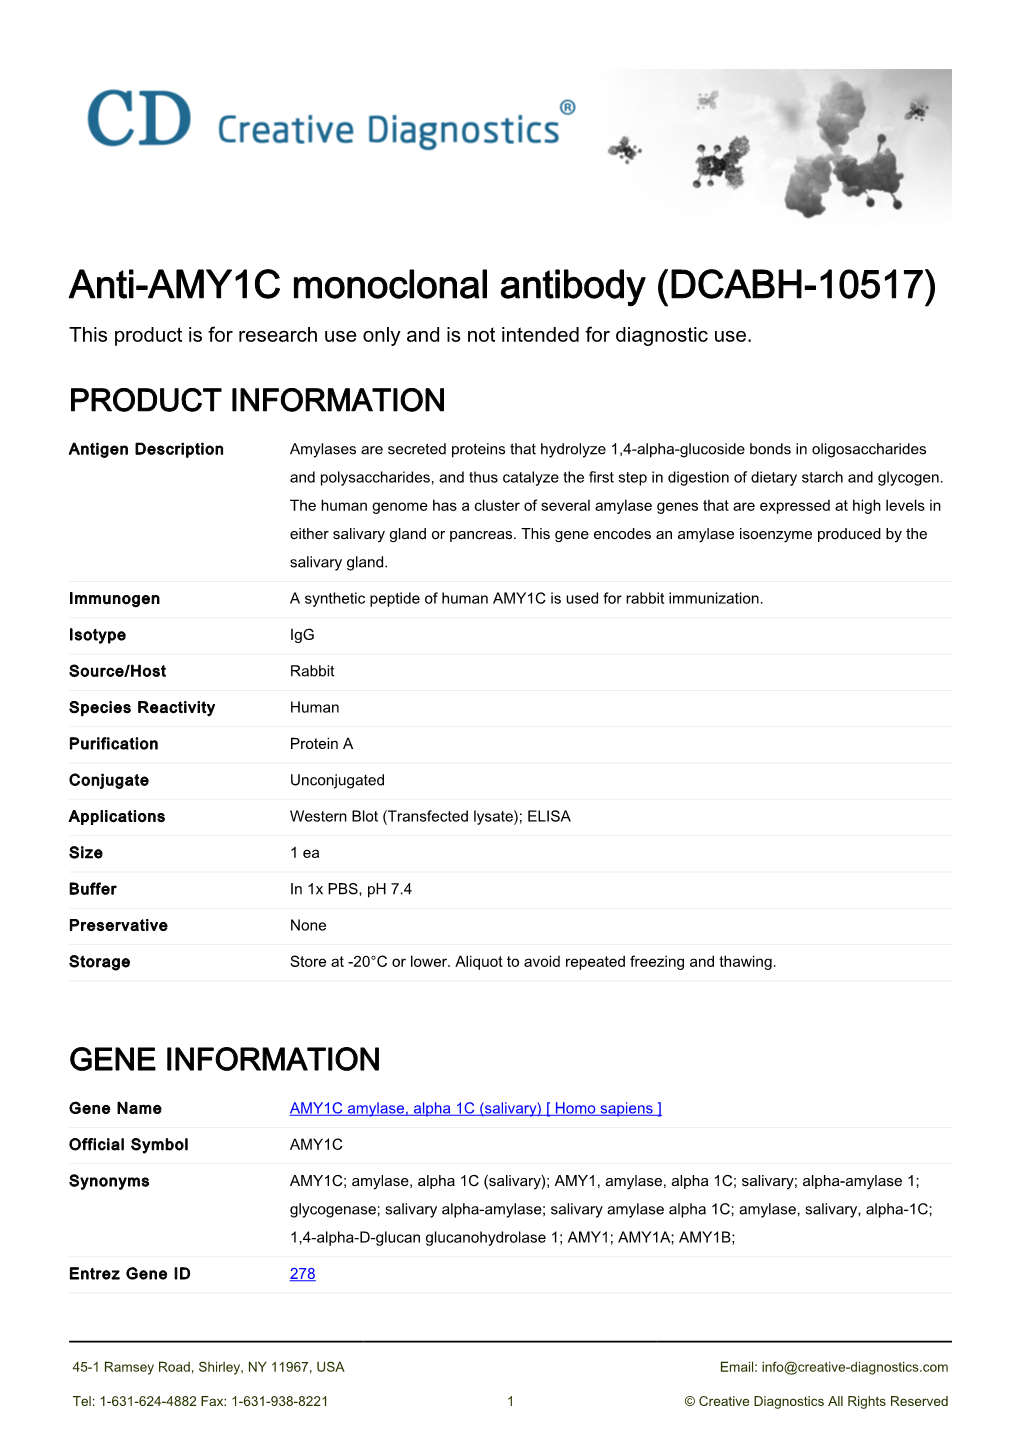 Anti-AMY1C Monoclonal Antibody (DCABH-10517) This Product Is for Research Use Only and Is Not Intended for Diagnostic Use